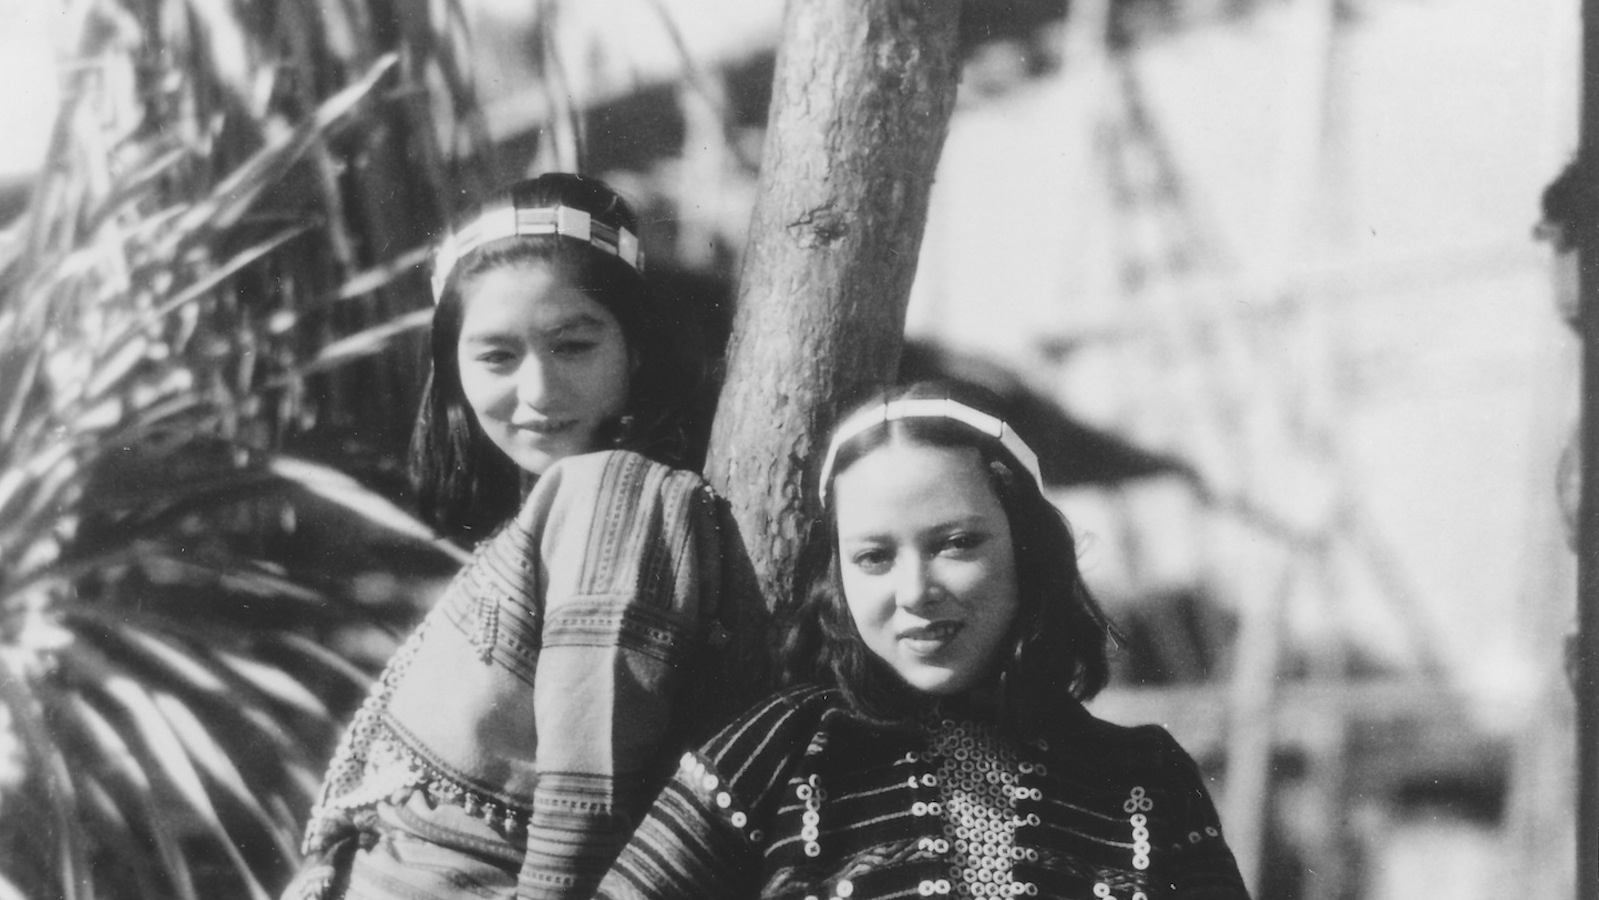 A black and white photo of two Japanese women leaning against a wooden pole and looking hopefully into the camera from a high angle.